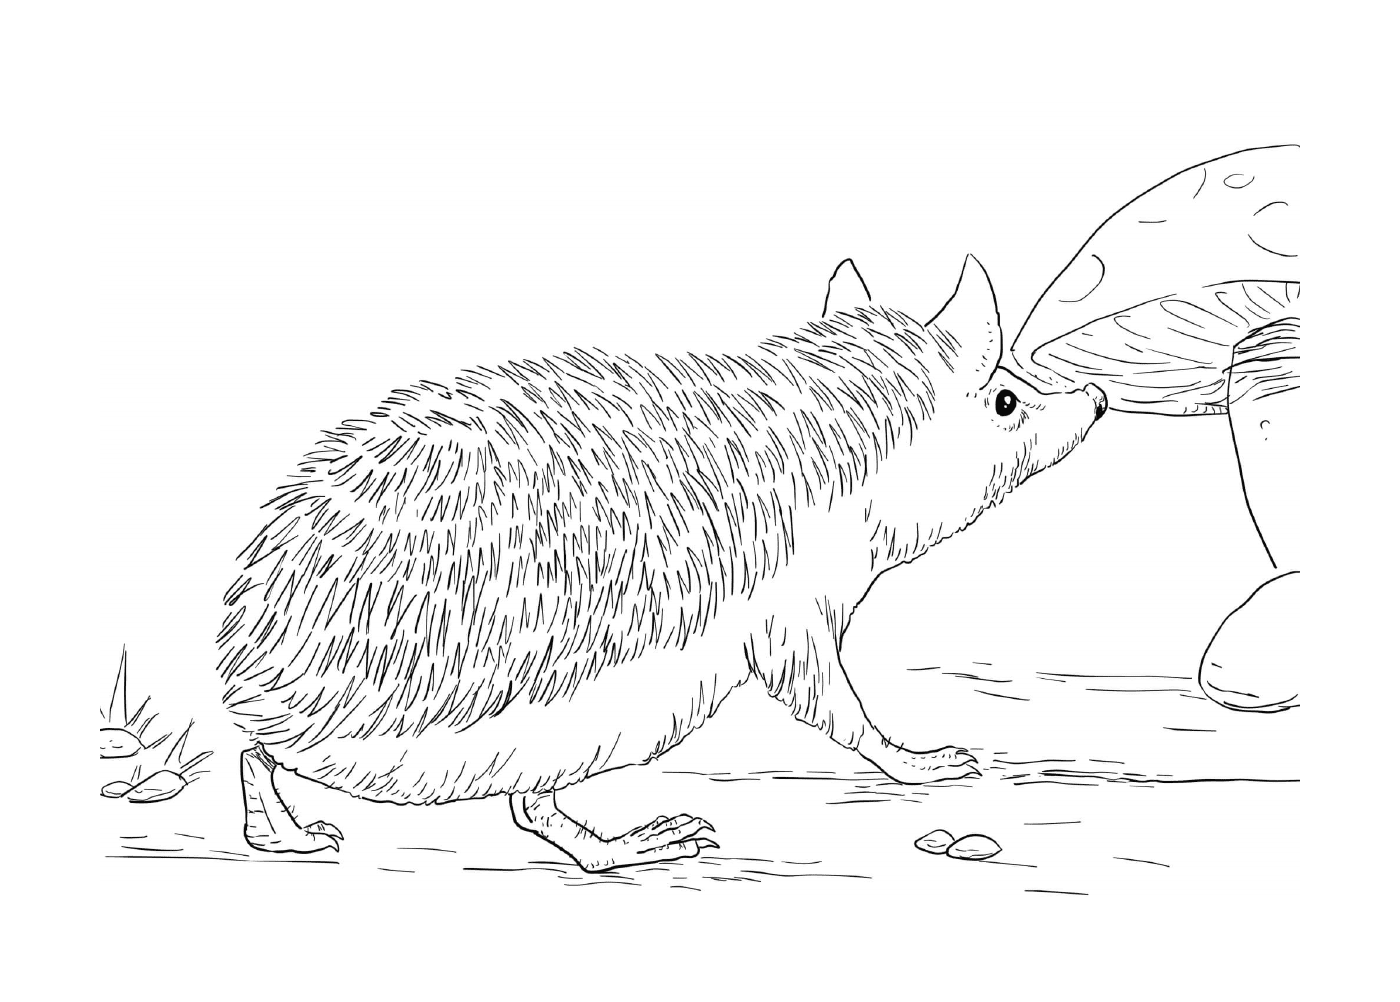  Realistic hedgehog wanting to eat a fungus 